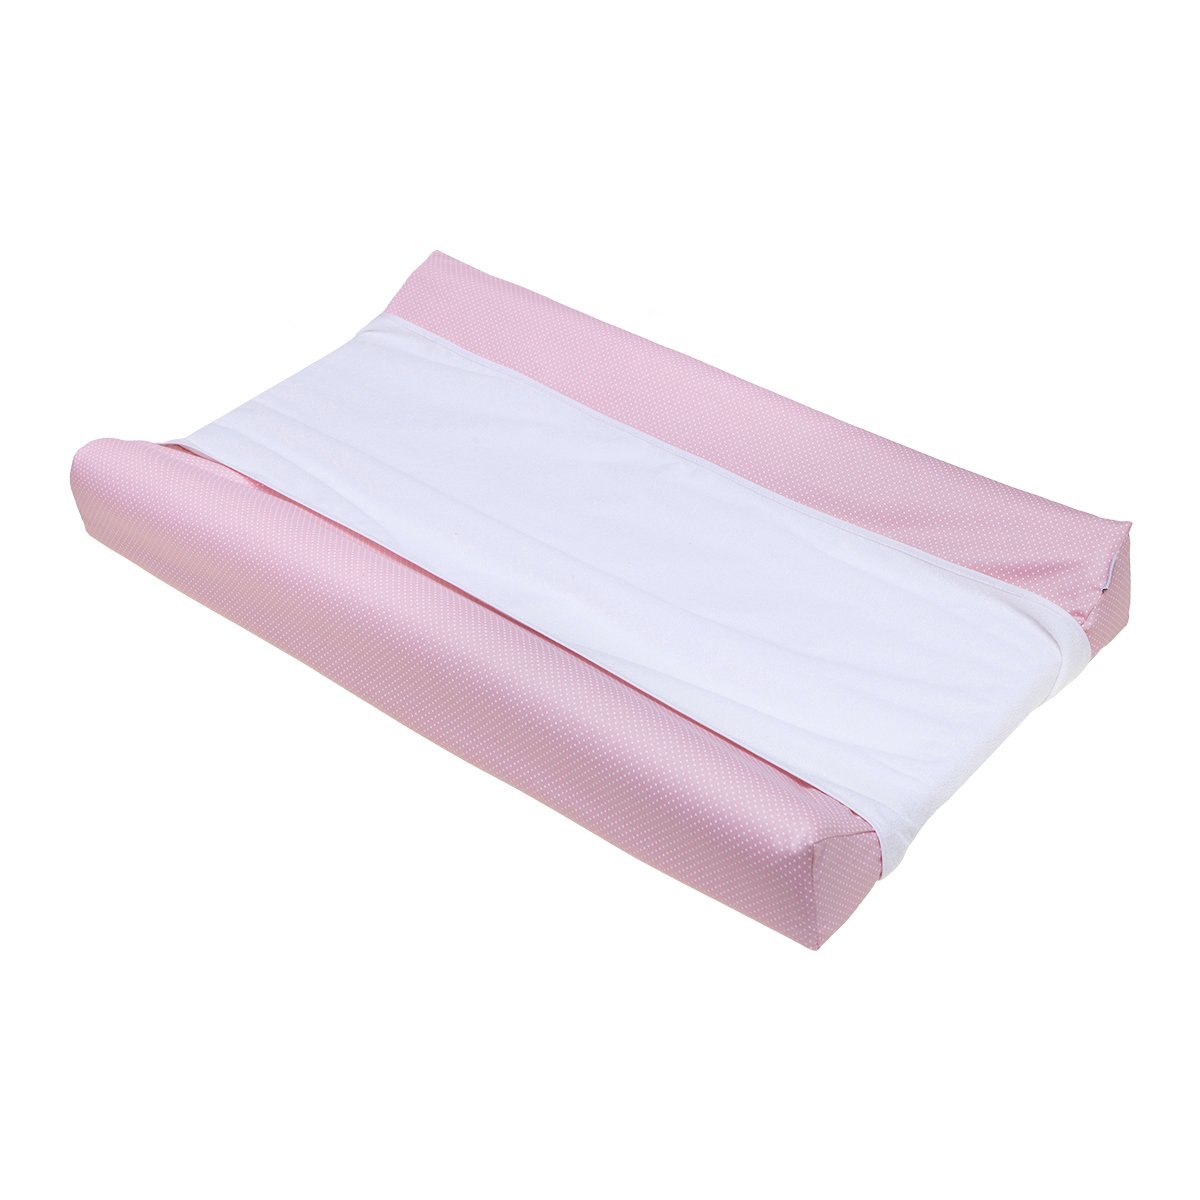 Cambrass 41004 Changing Mat Foam Combo Pic 42x70 cm – pink